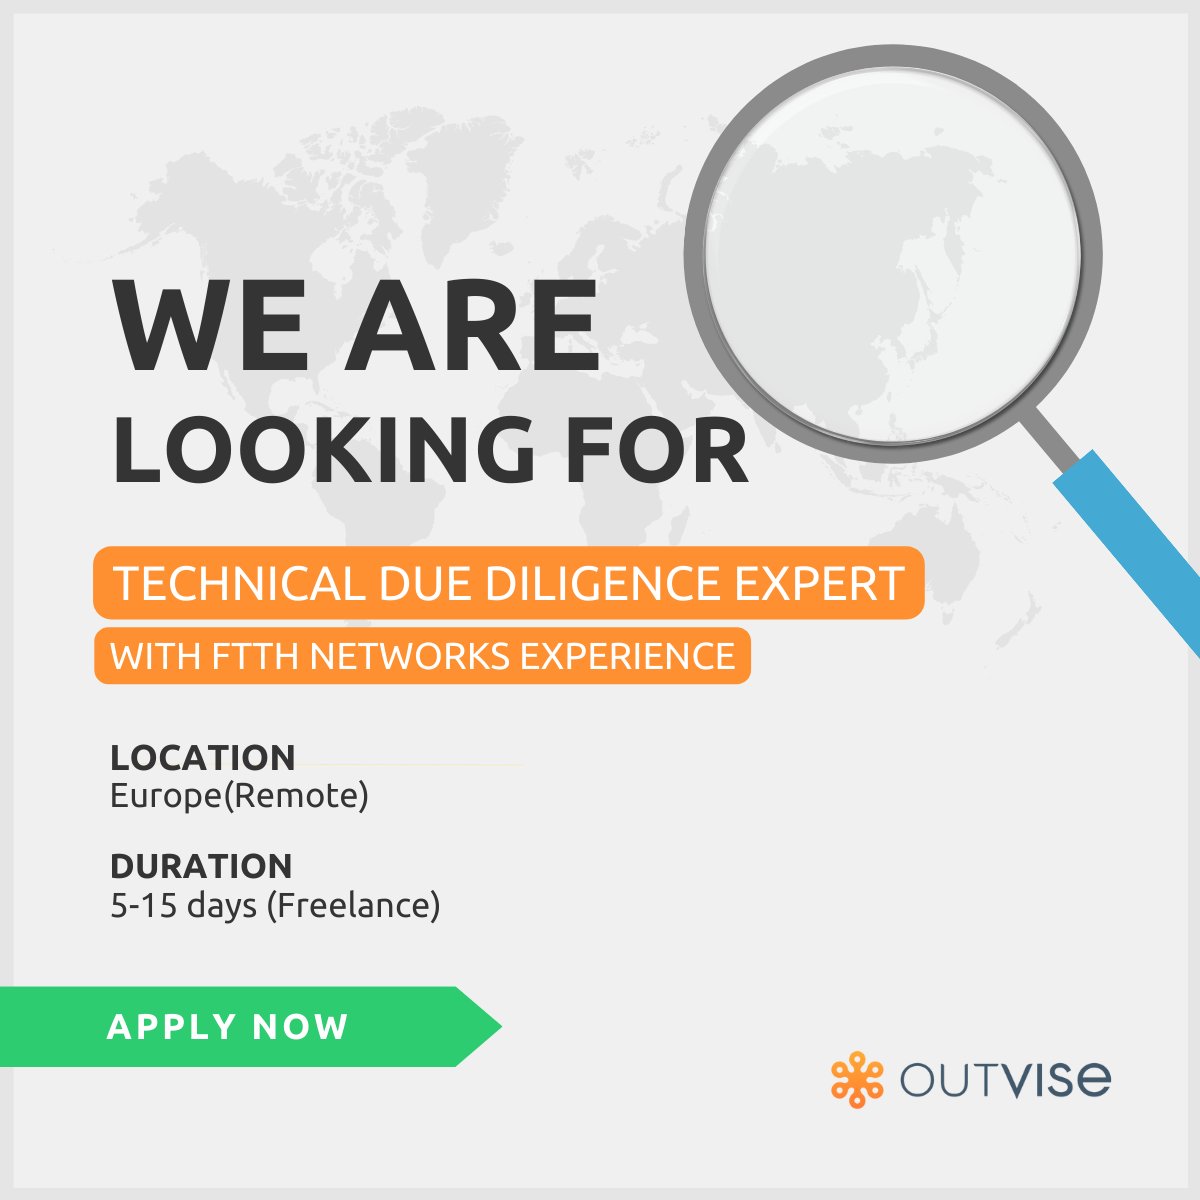 Our client is seeking a Technical Due Diligence expert with FTTH networks experience (Spanish market). 🔎

Apply here 👉 outvise.com/sl/vmTa0NTPOC

#OutviseProjects #Freelance #Hiringnow #Europe